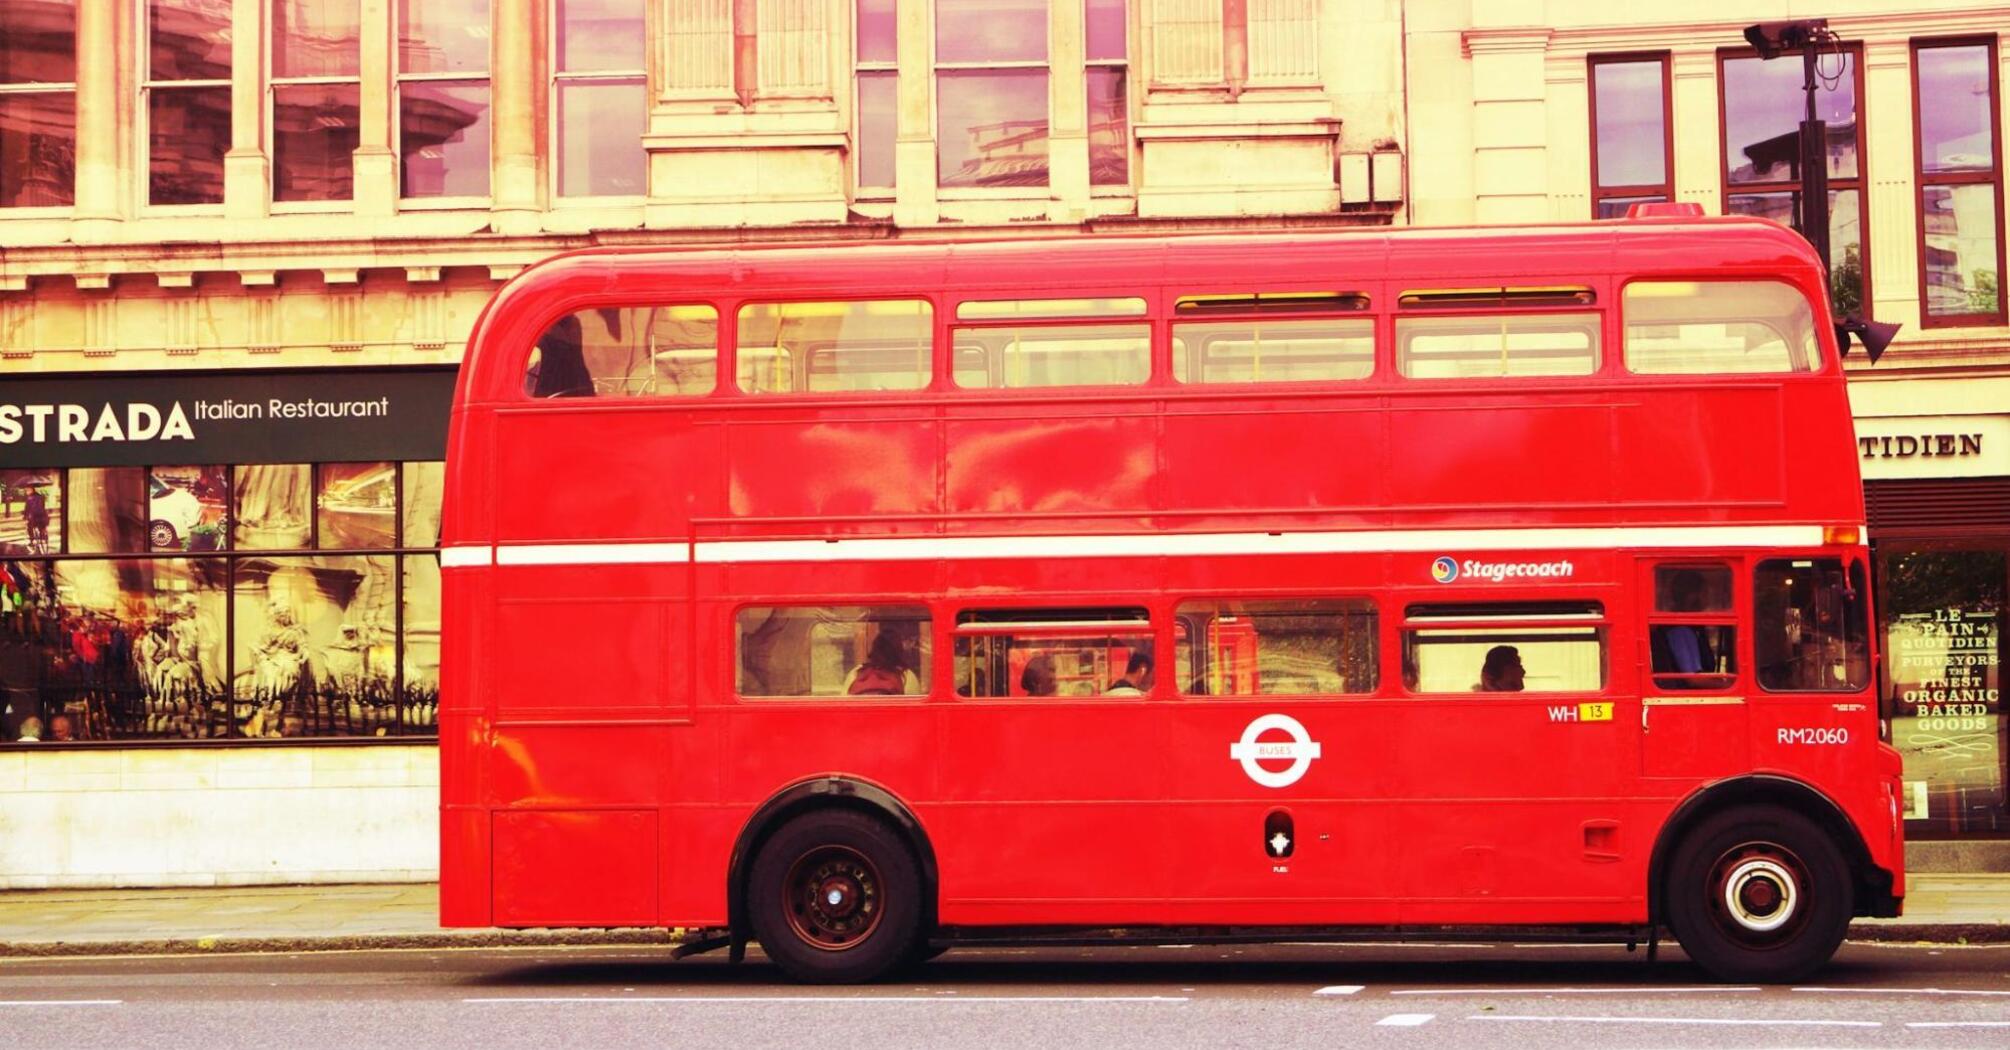 A classic red double-decker Stagecoach bus parked in front of a building with a restaurant sign